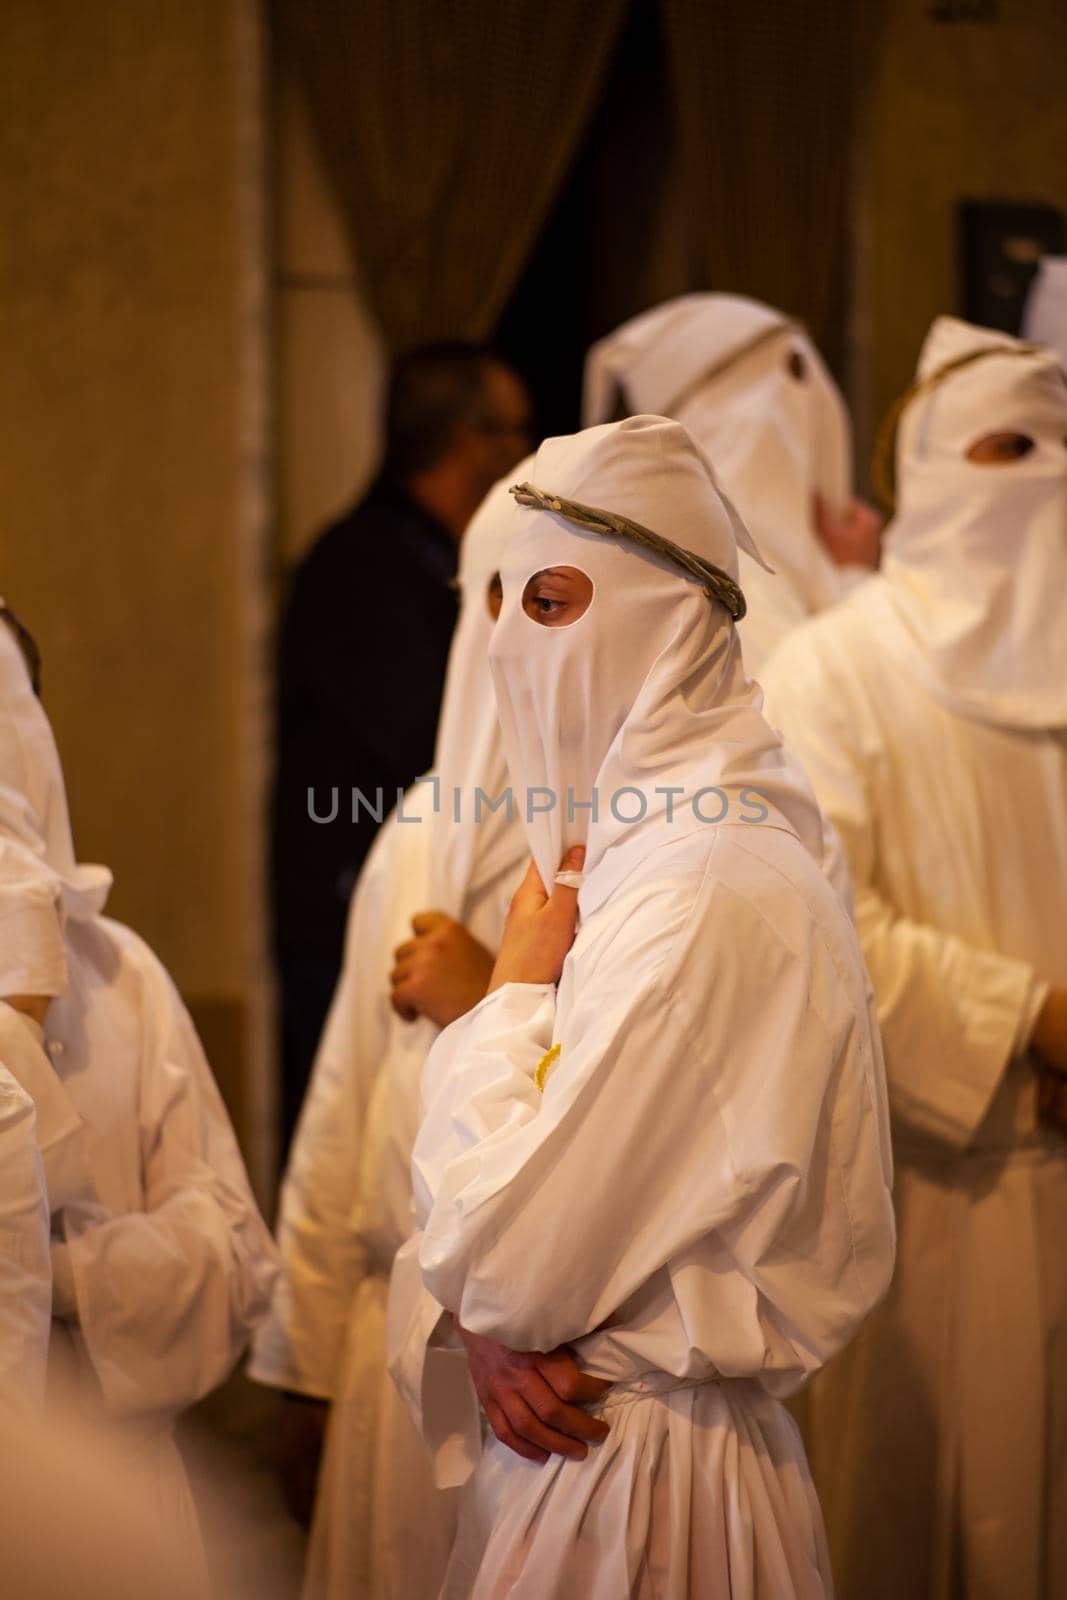 LEONFORTE, SICILY - APRIL, 19: Christian brethren during the traditional Good Friday procession on April 19, 2019